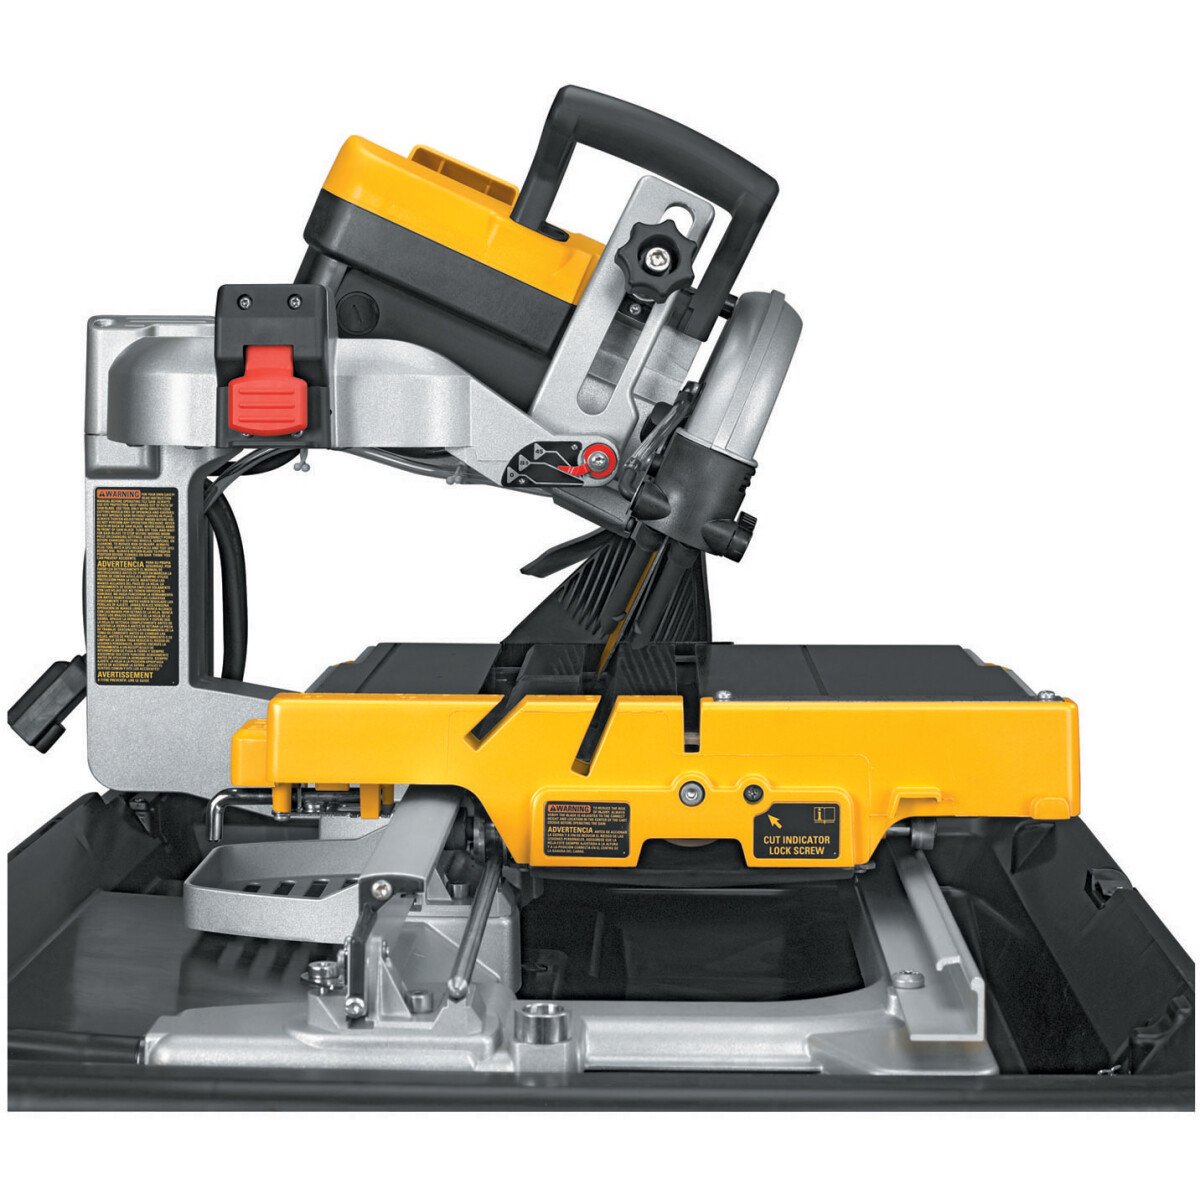 DeWalt D24000 Masonry Wet Tile Saw with D240001-XJ Leg Stand from